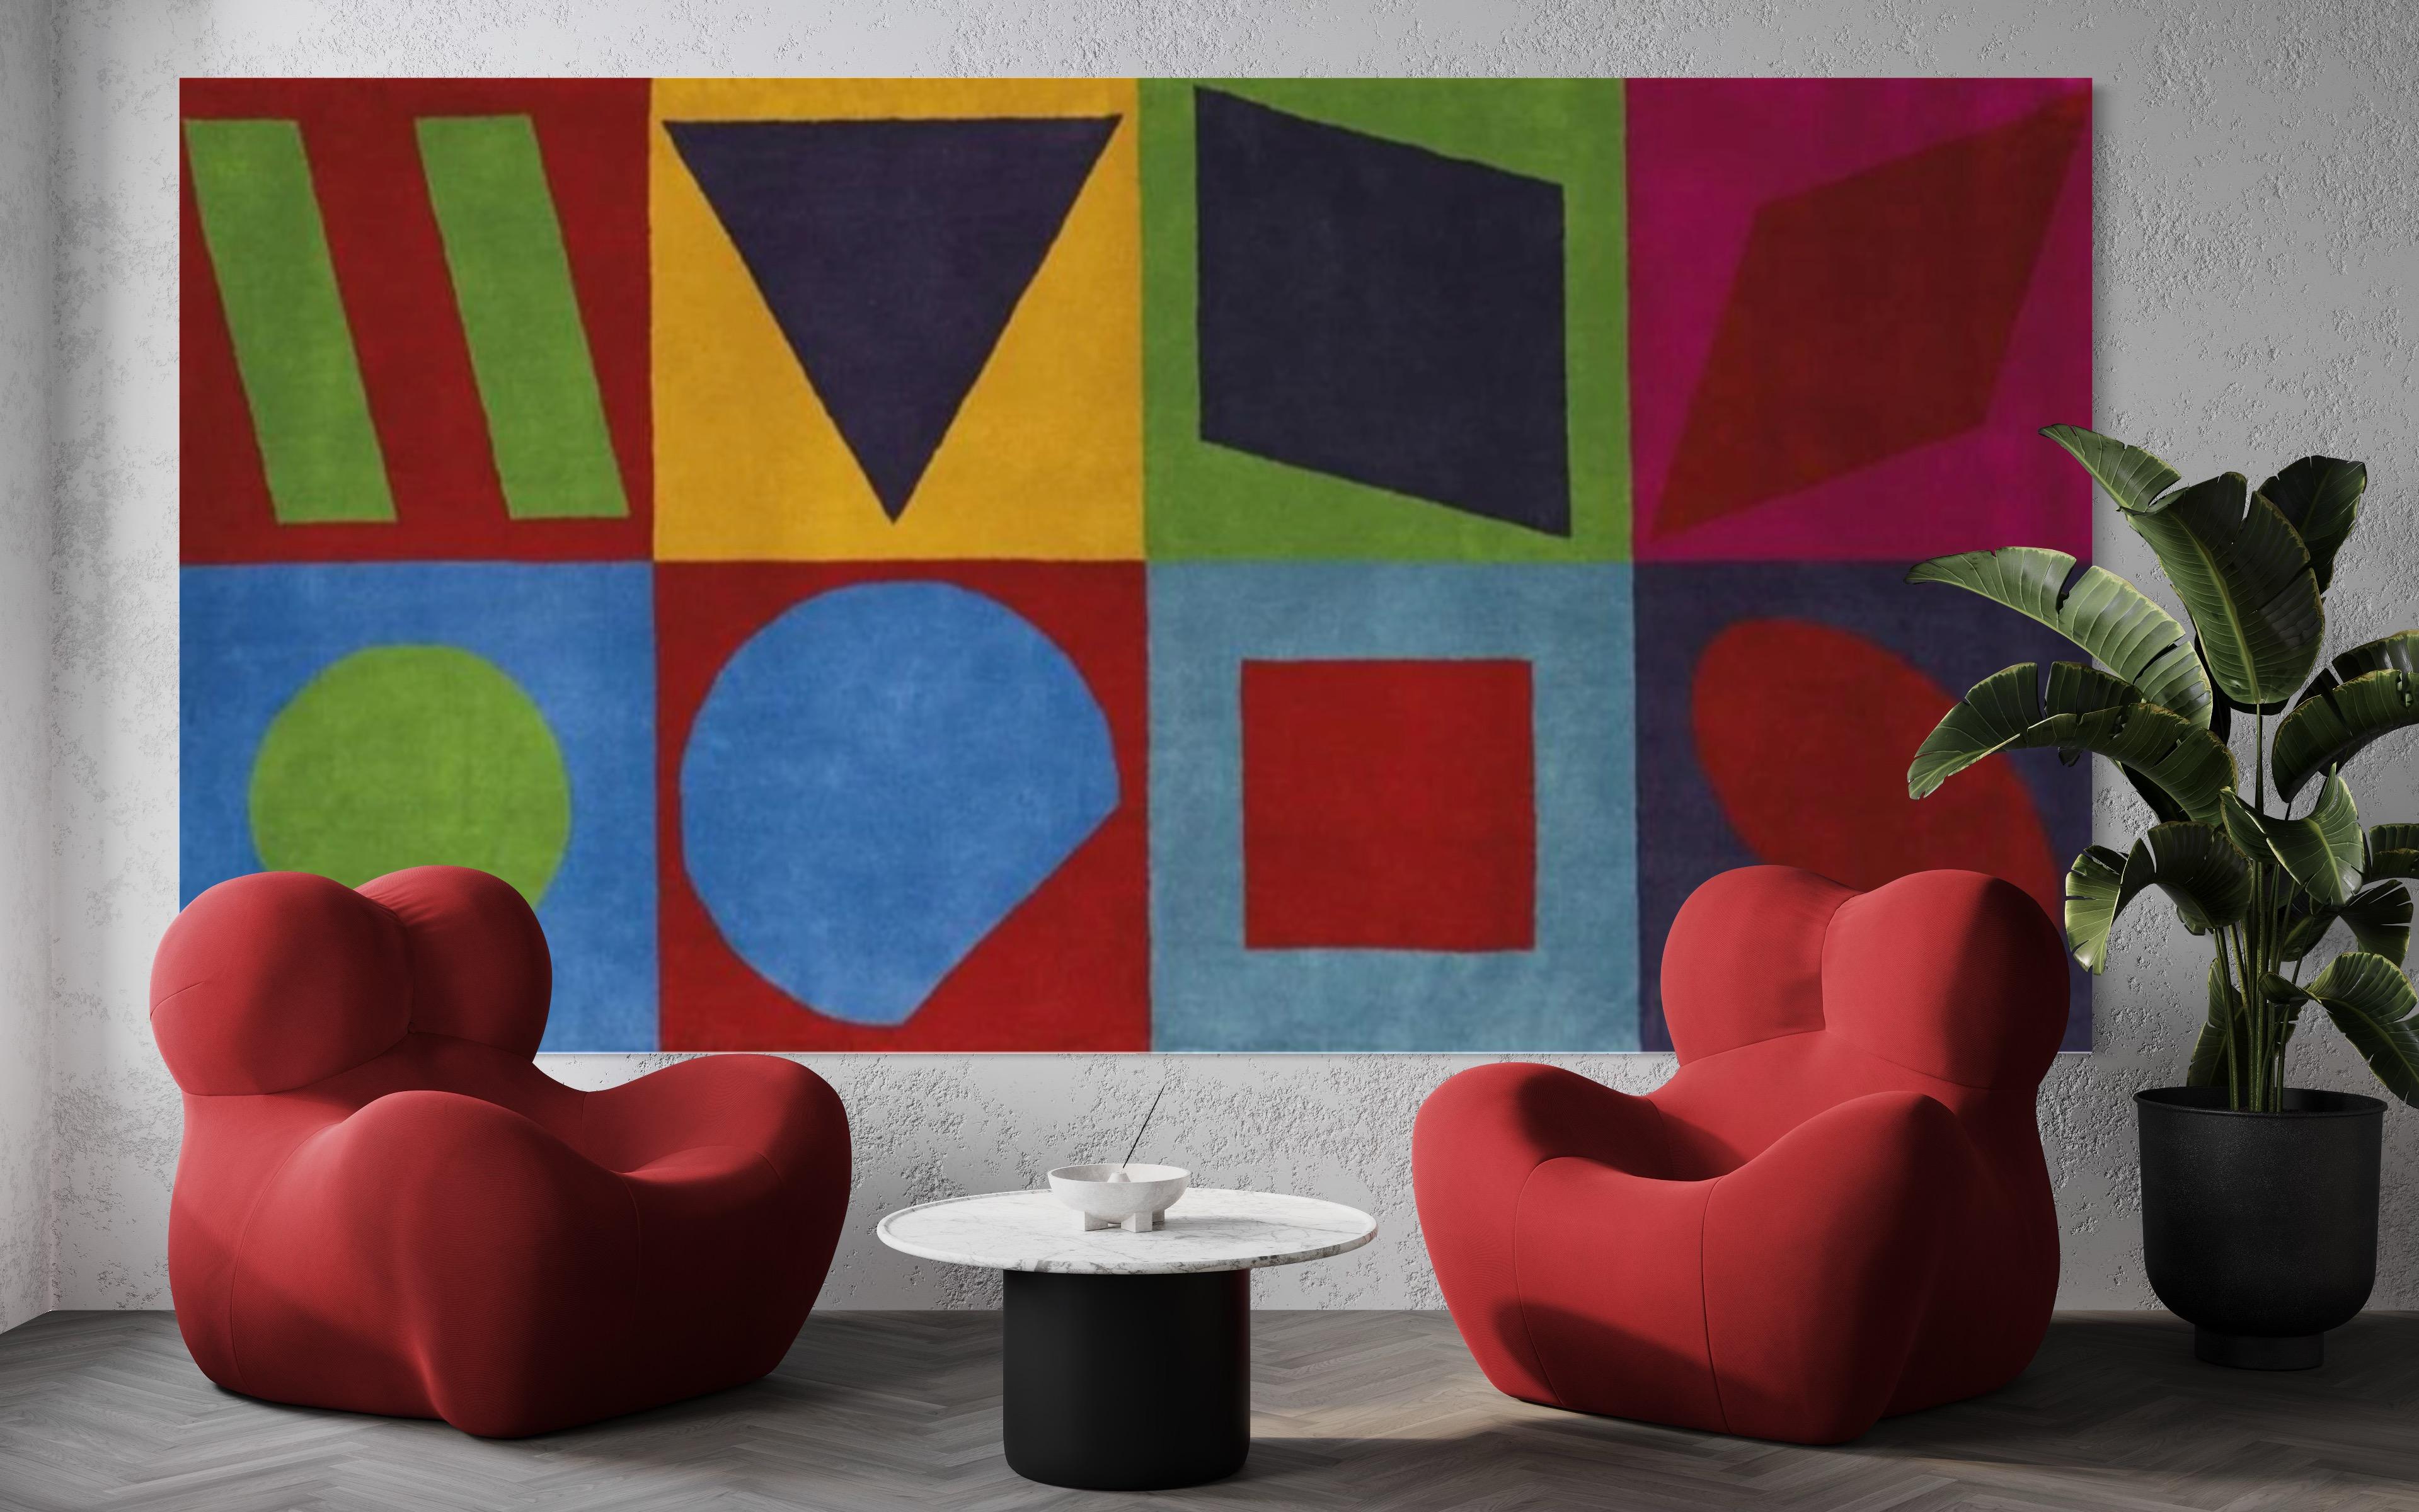 Victor Vasarely, 
Val Myta
Hand-knotted woven tapestry, 1975
Edition of 8
201 x 394 cm (79 1/8 x 155 1/8 in)
The artwork is offered unframed. 
Edition number might vary from what is shown in the pictures. 

Victor Vasarely was a French-Hungarian